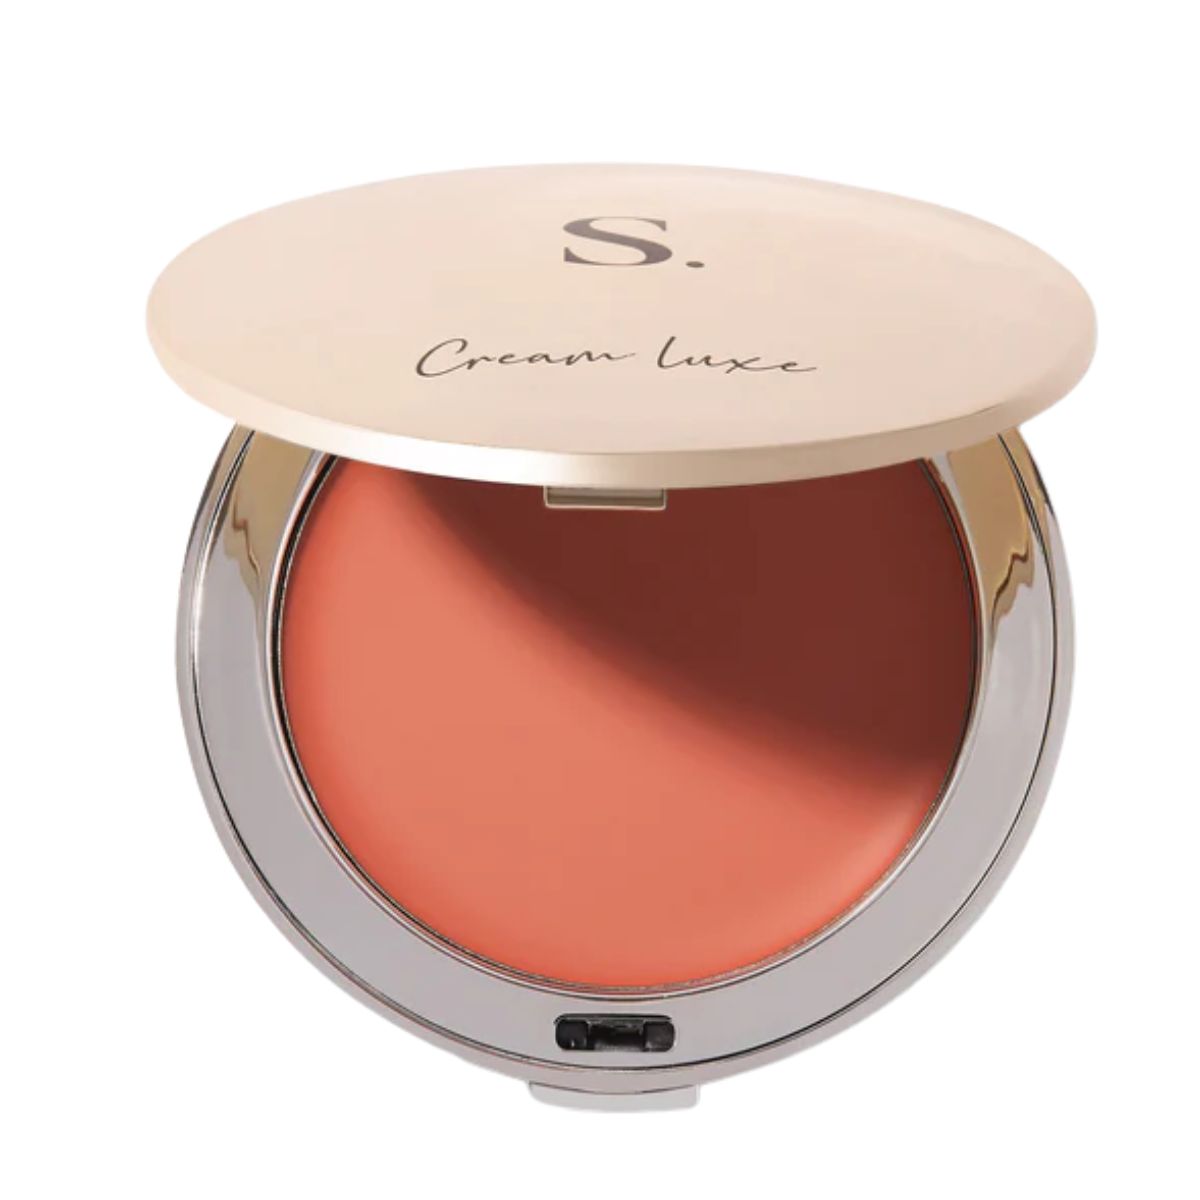 Sculpted By Aimee Connolly Creme Luxe Blush